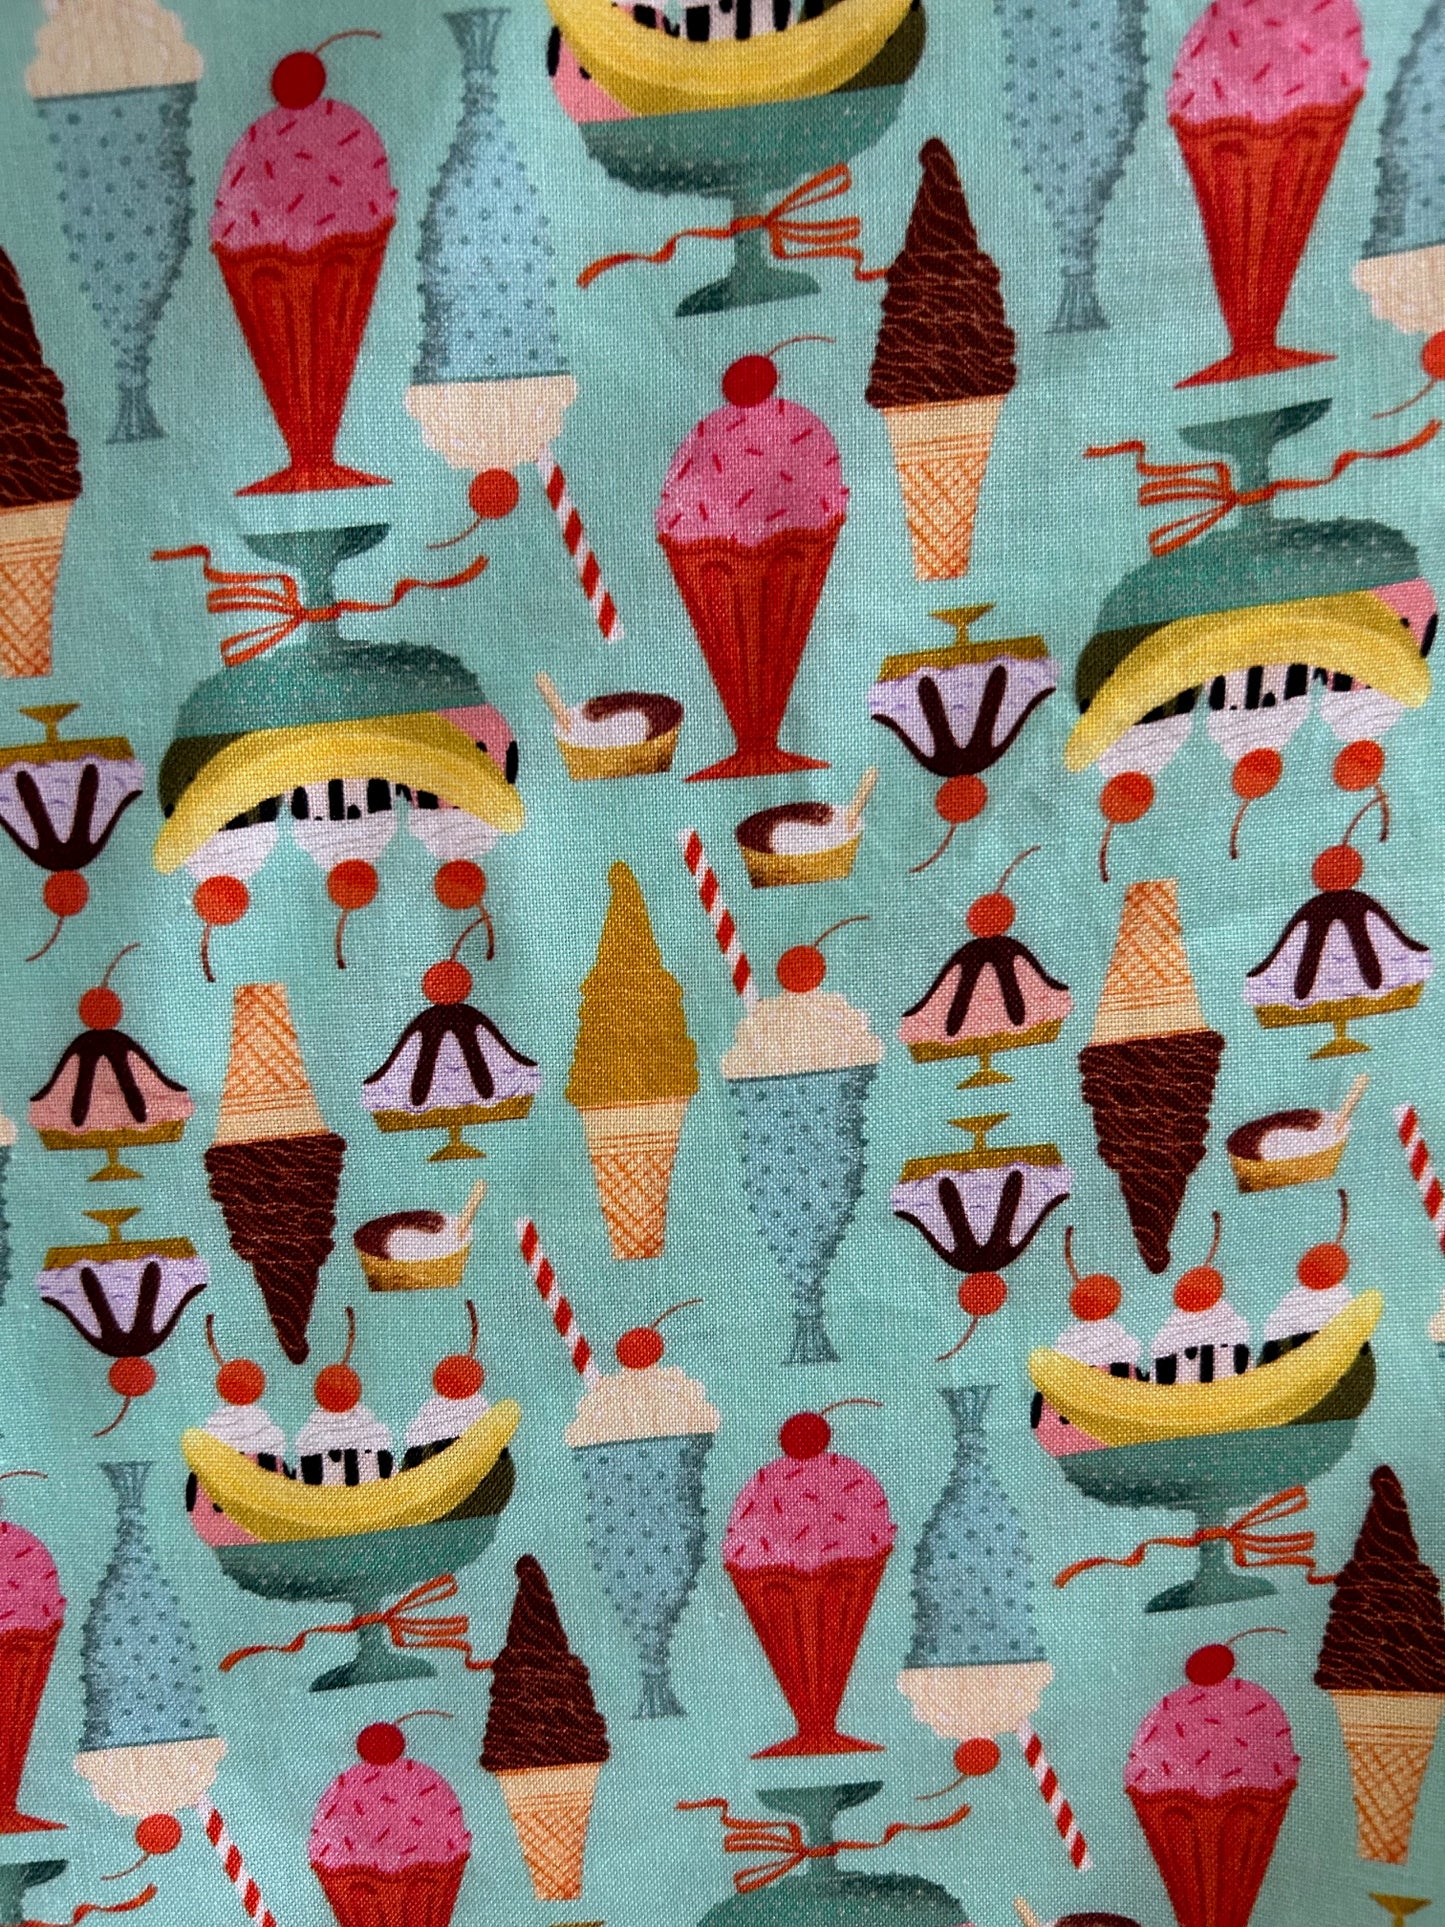 close up of print showing all the ice cream sundays and treats